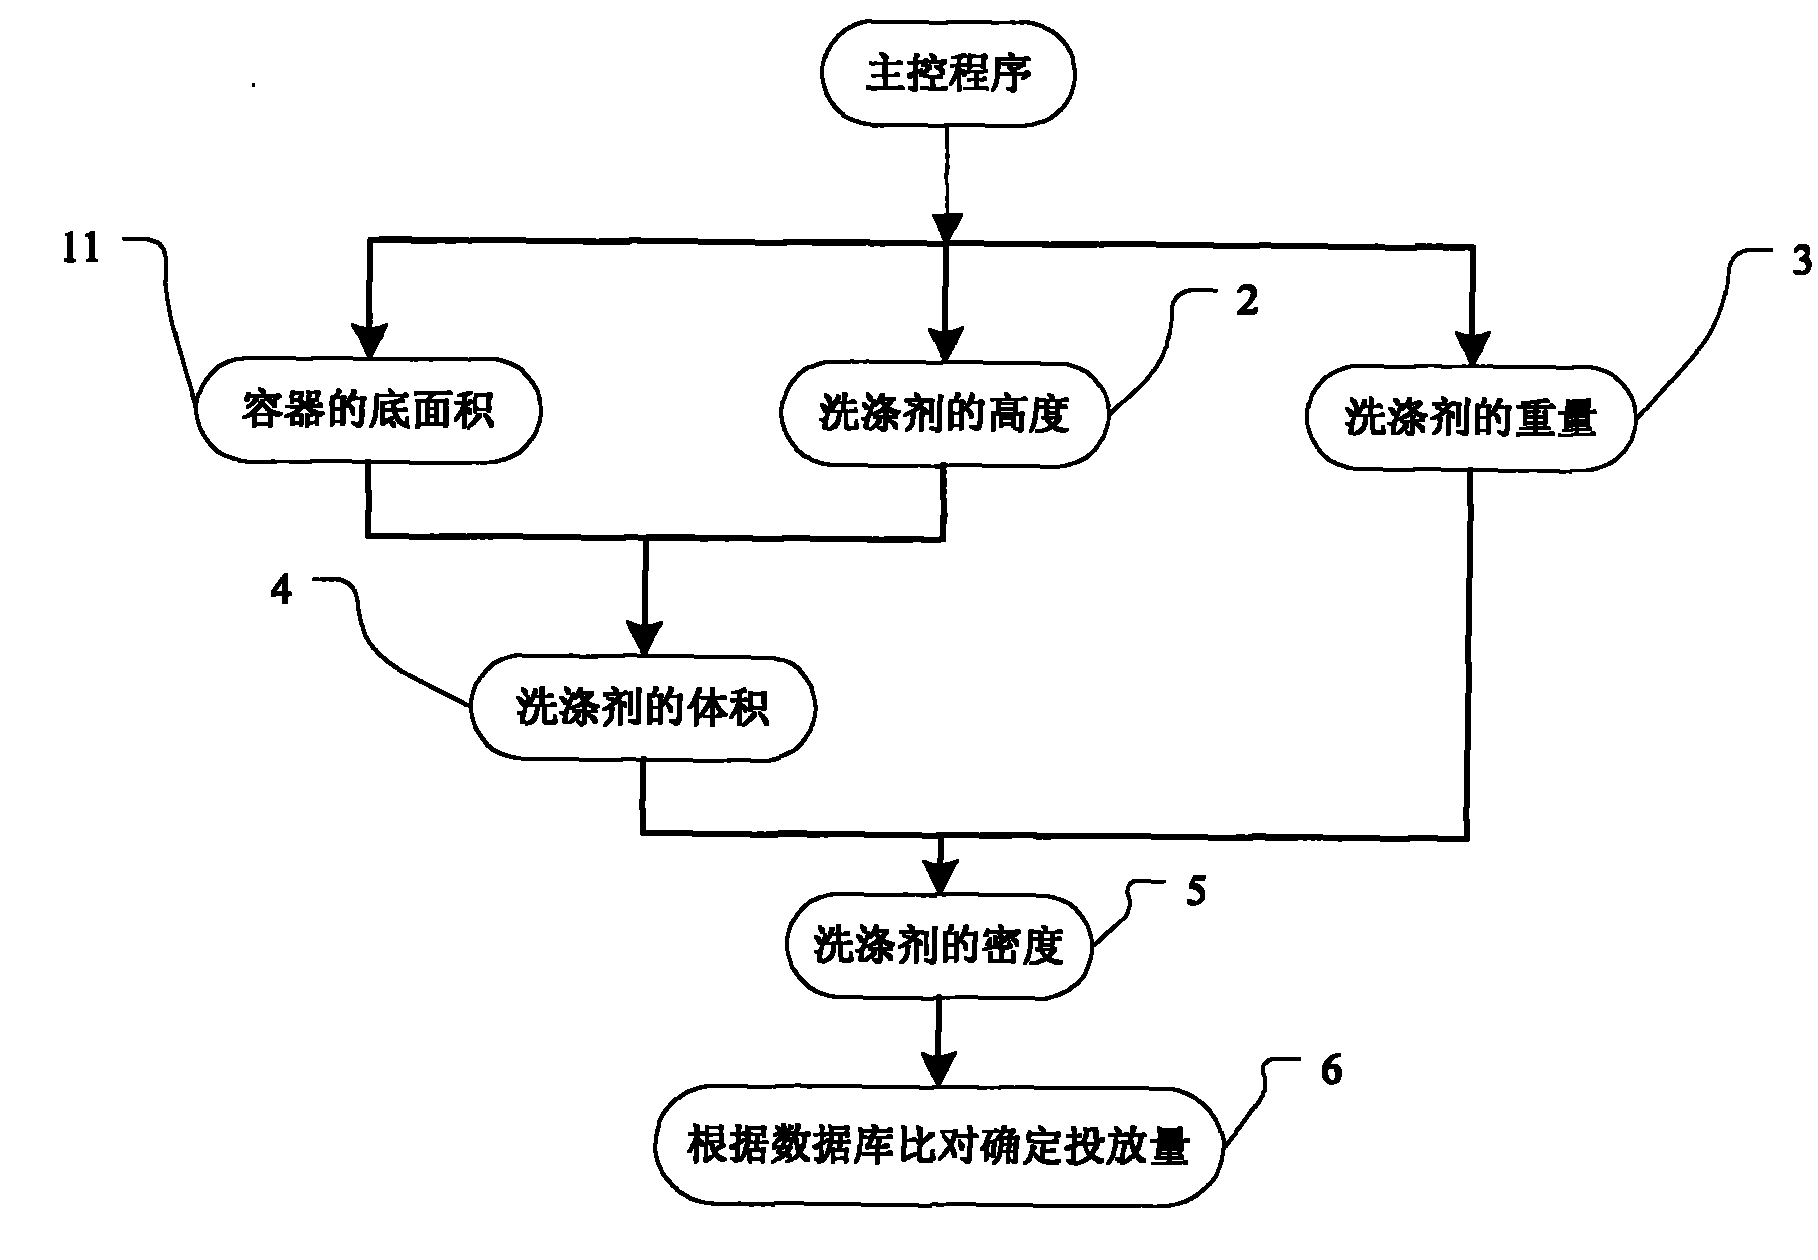 Method for automatically determining adding amount of detergent according to detergent concentration of washing machine